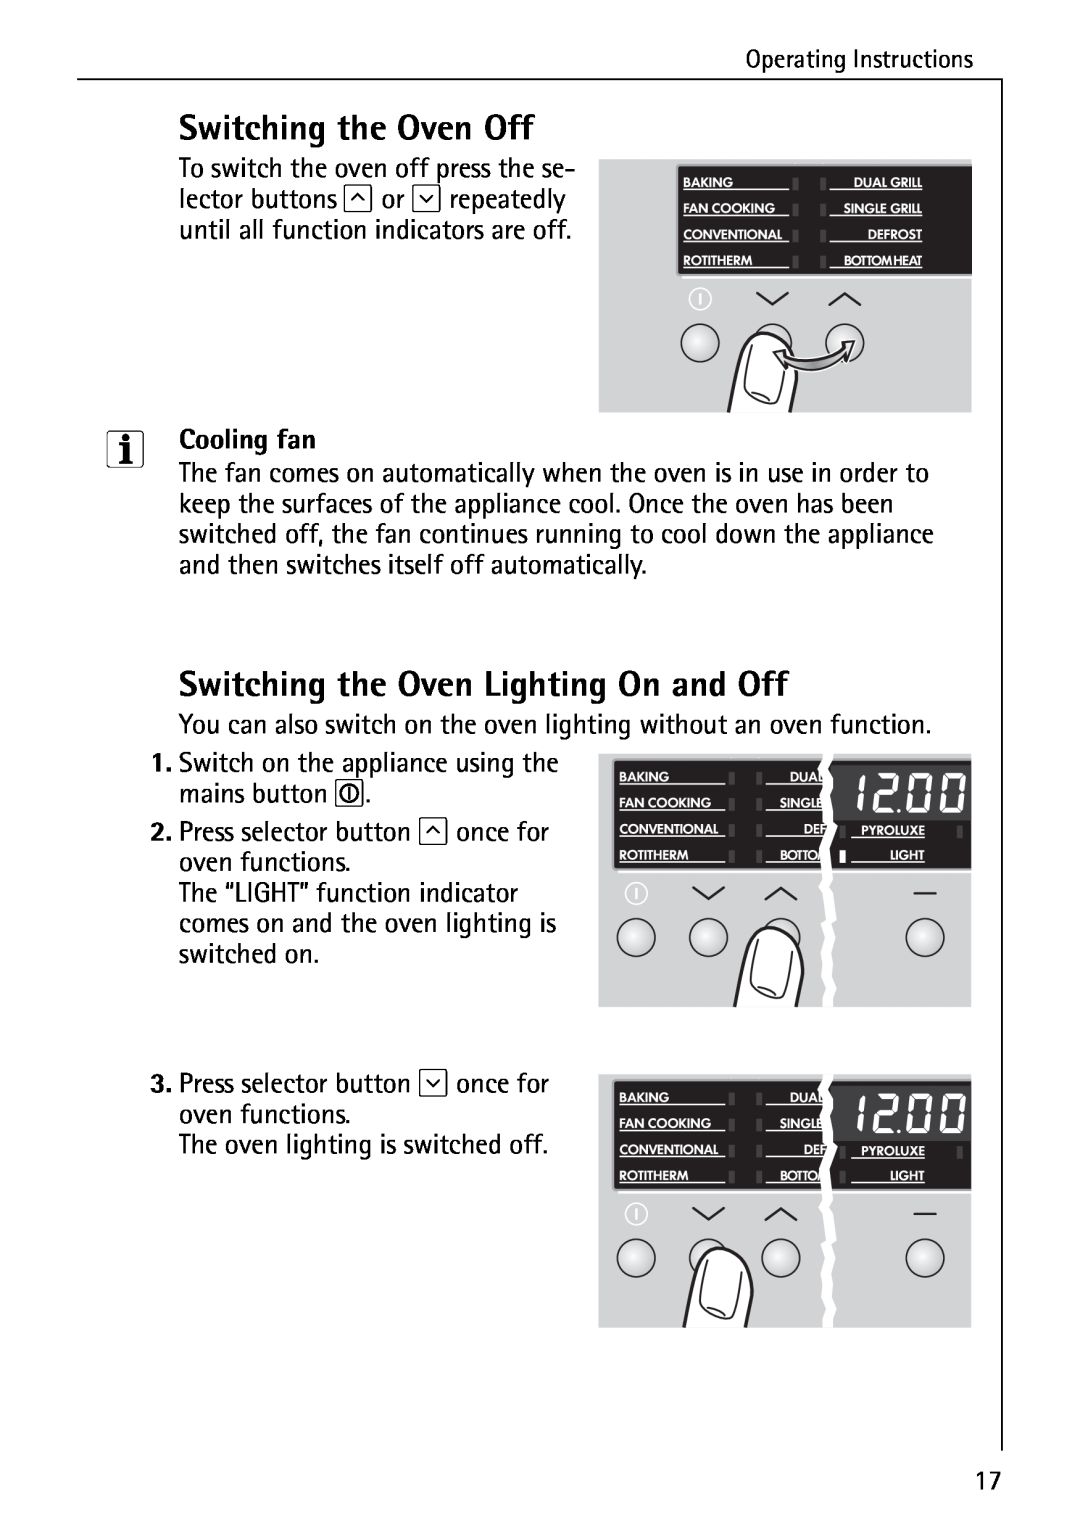 Electrolux B6140-1 manual Switching the Oven Off, Switching the Oven Lighting On and Off, Cooling fan 